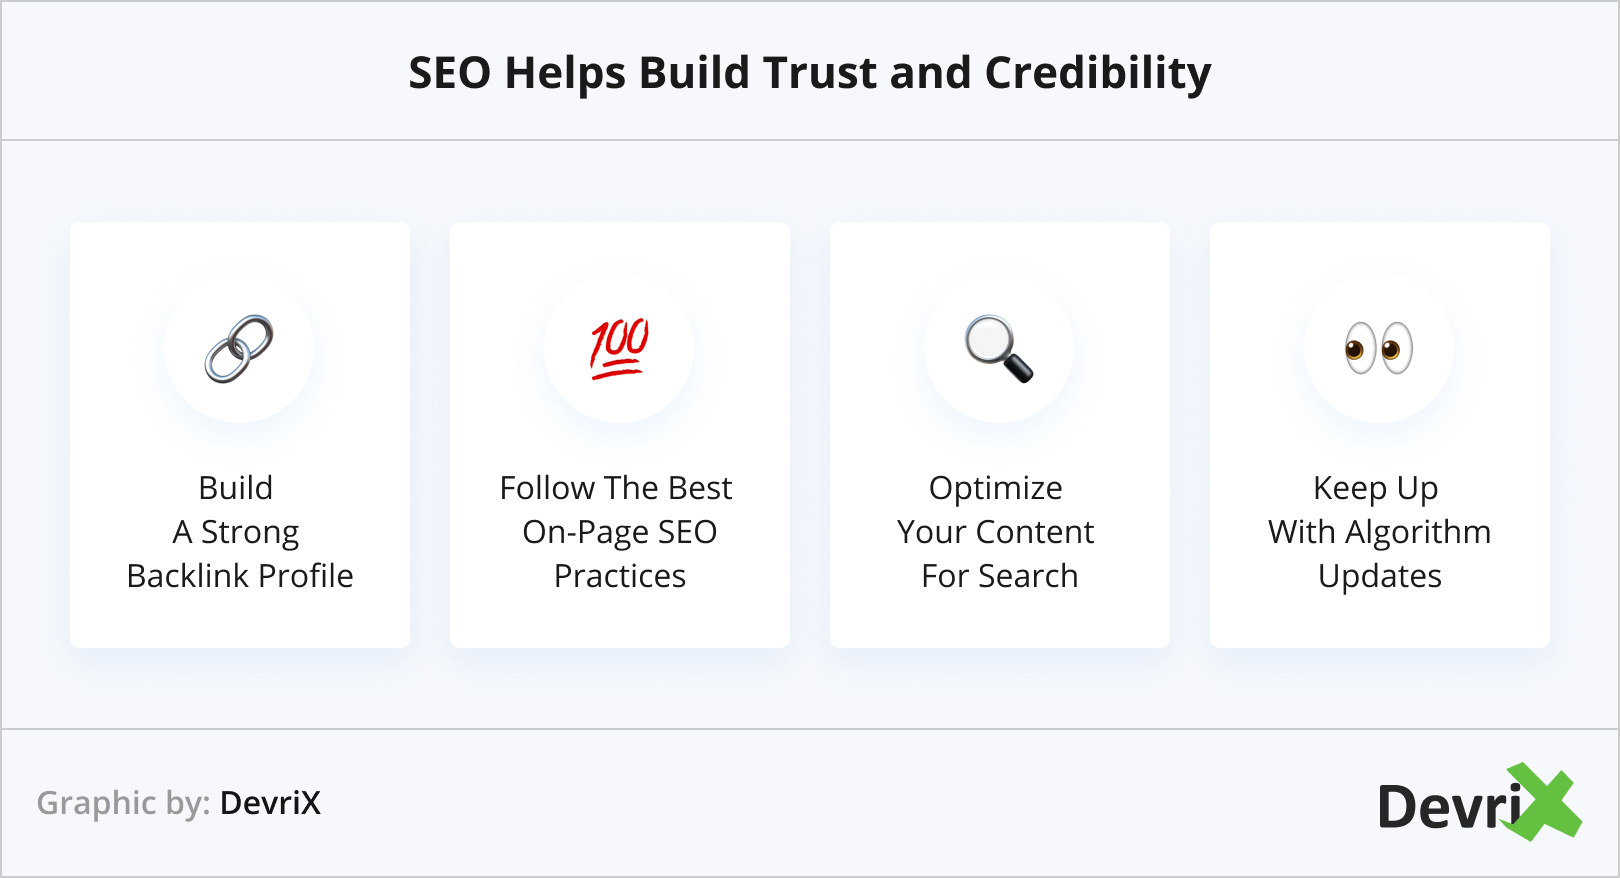 SEO Helps Build Trust and Credibility